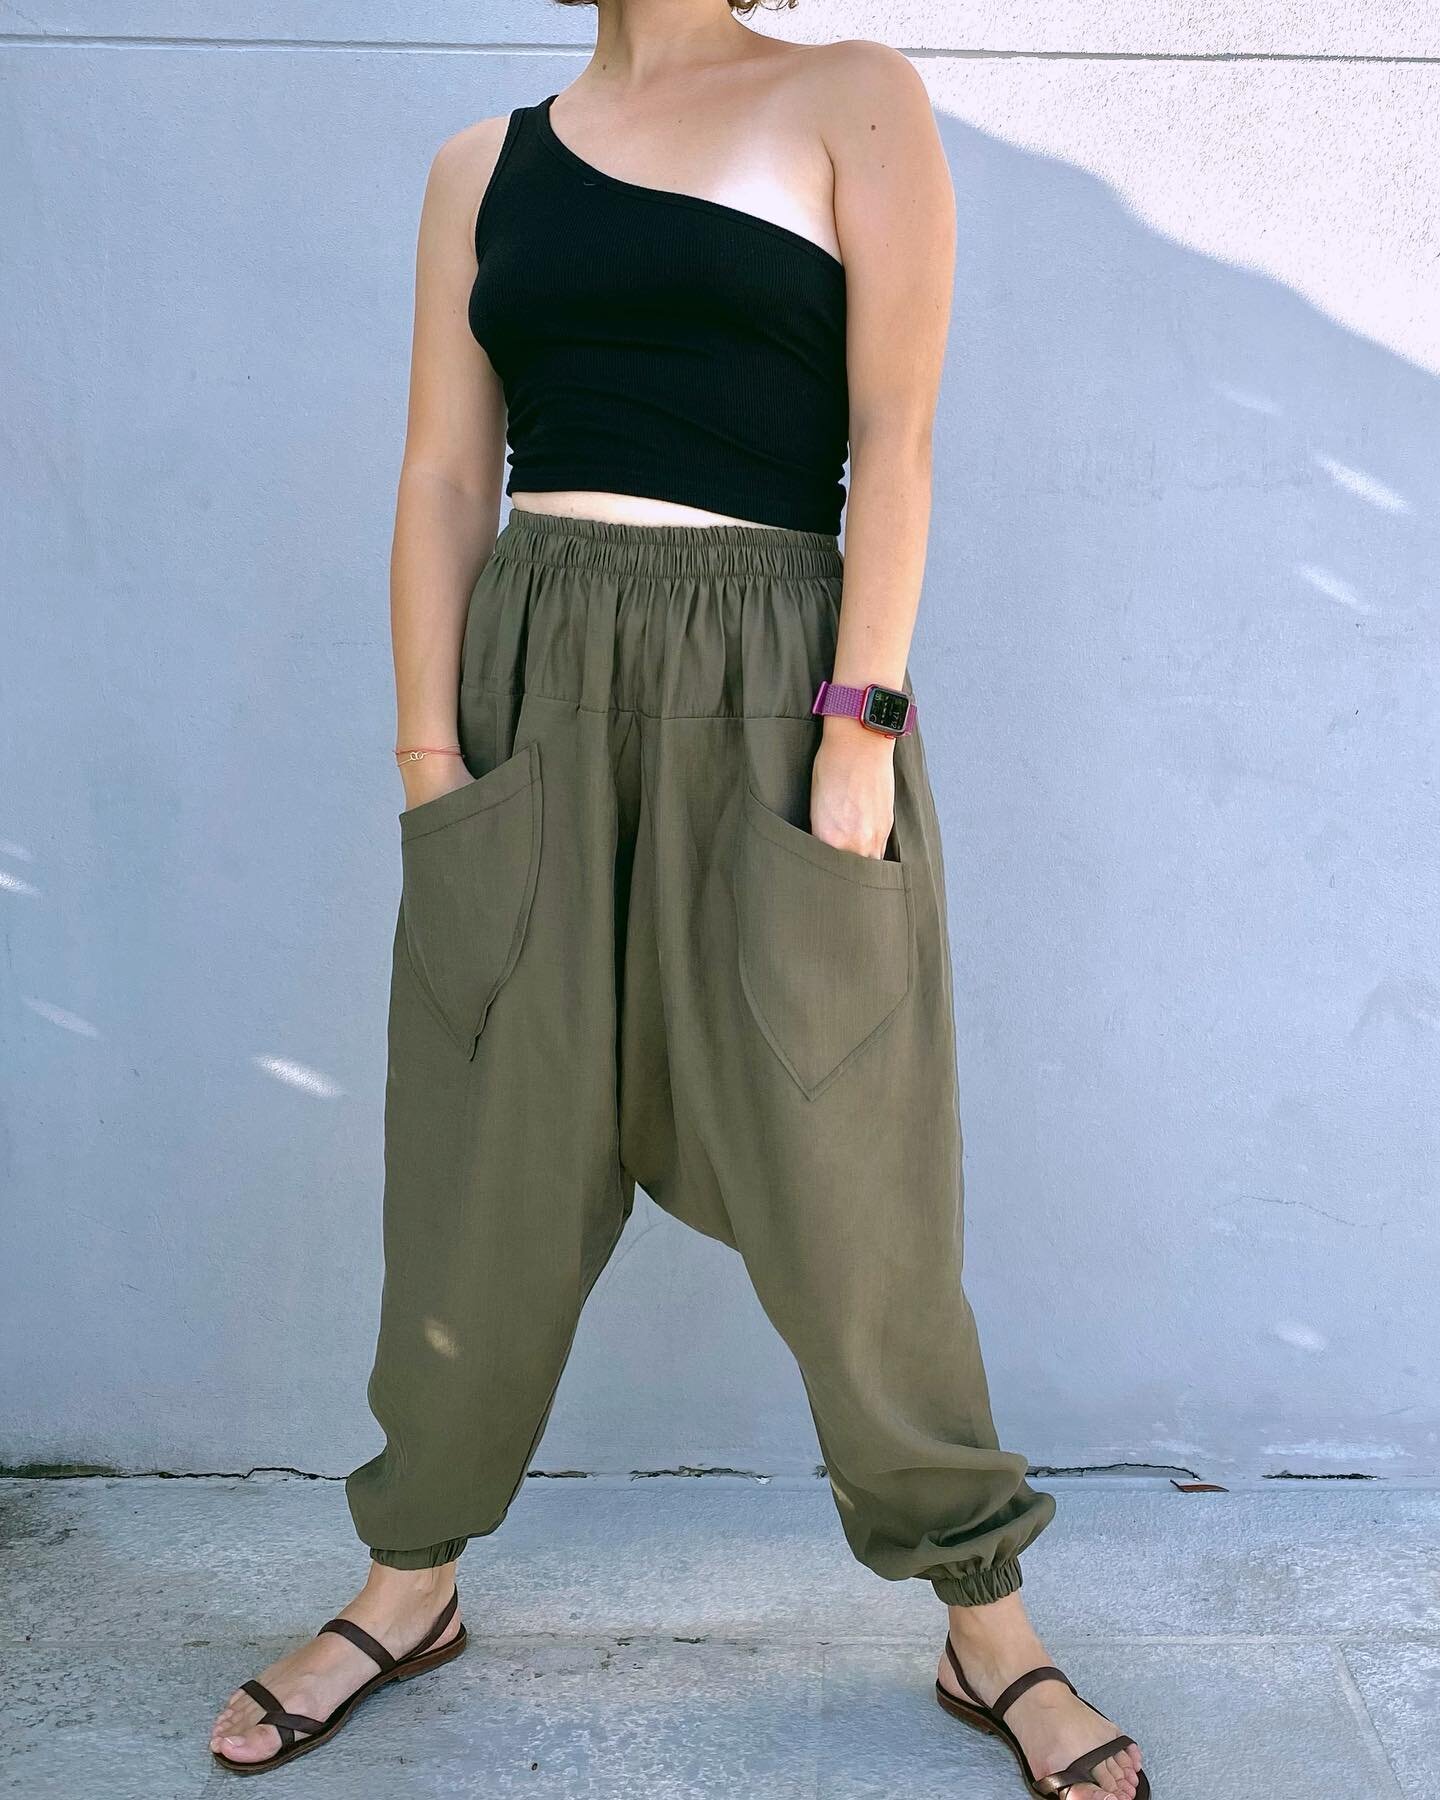 A smooth transition from Friday to Saturday with lyocell harem pants 😌
.
.
.
#minikcollection #slowfashion #harempants #lyocell #weekendstyle